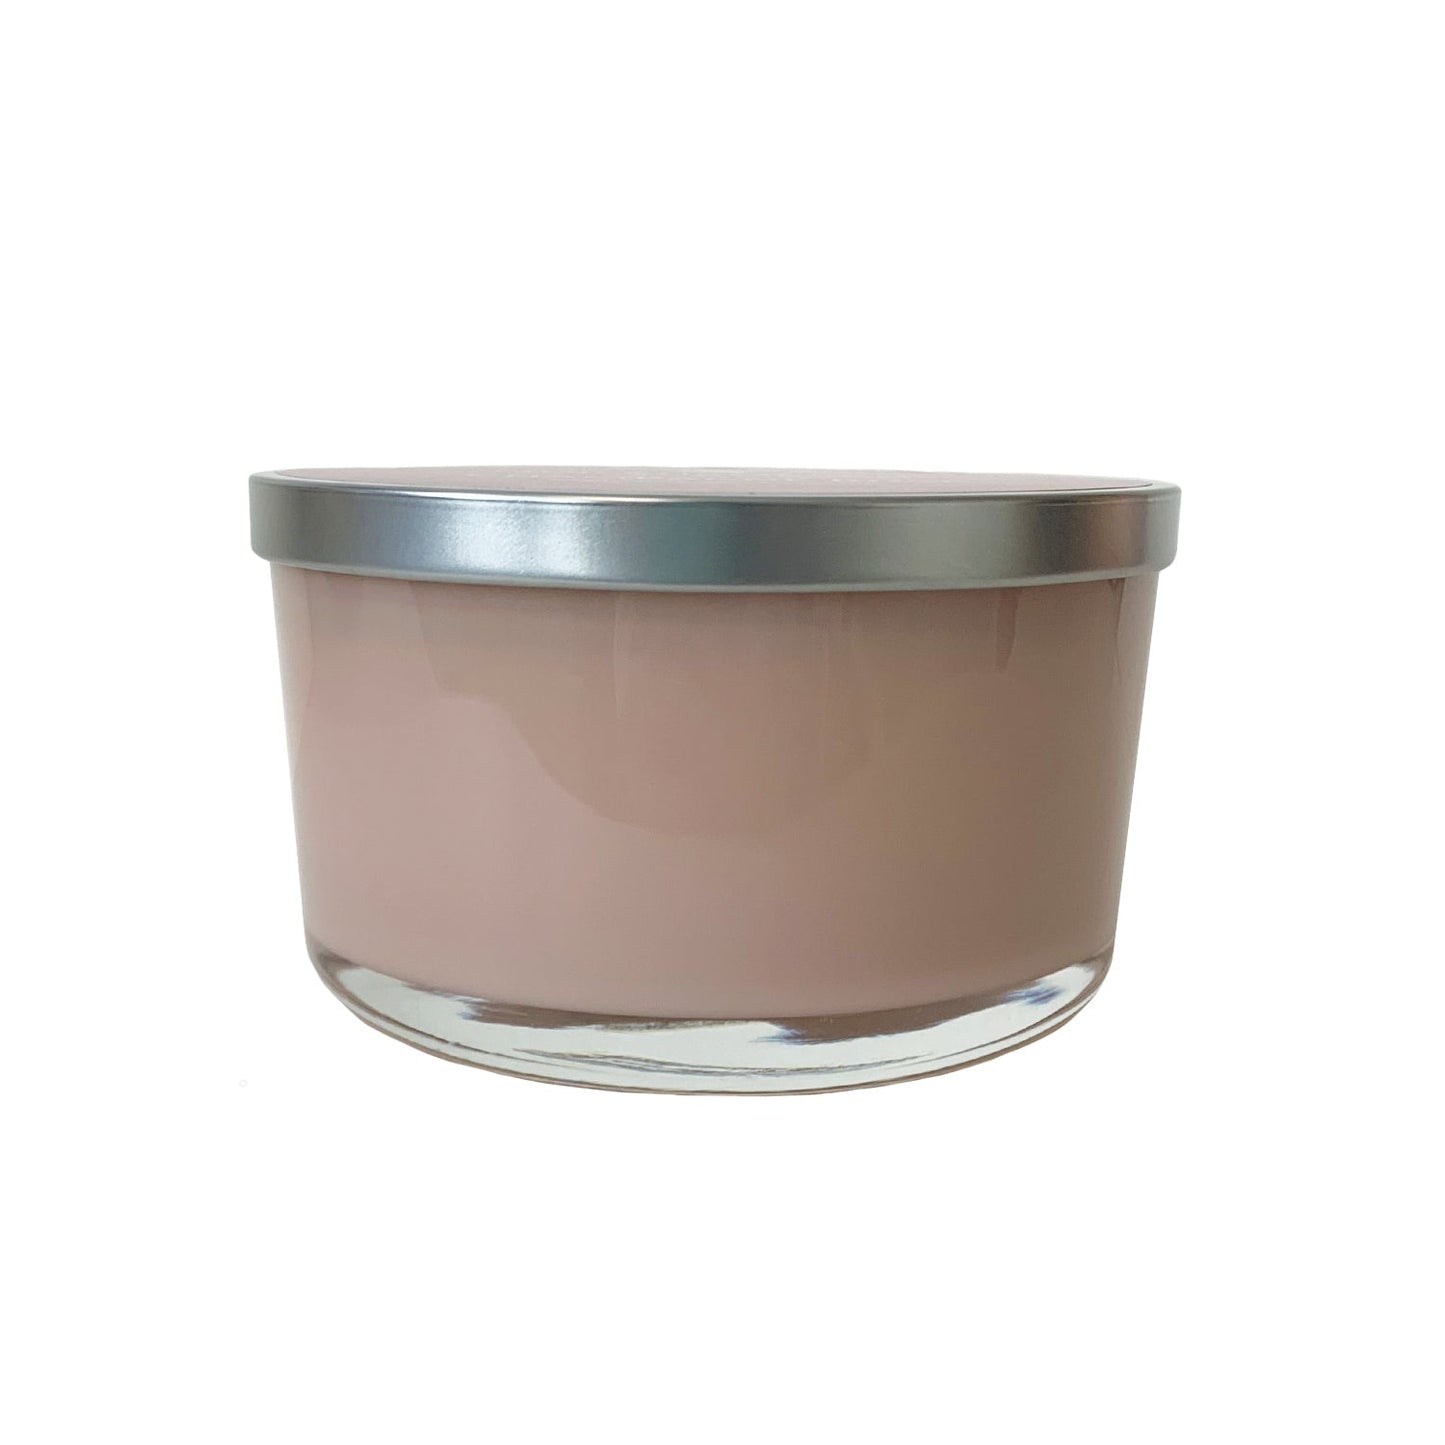 Pier 1 Pink Champagne 14oz Filled 3-Wick Candle - The Home Resolution